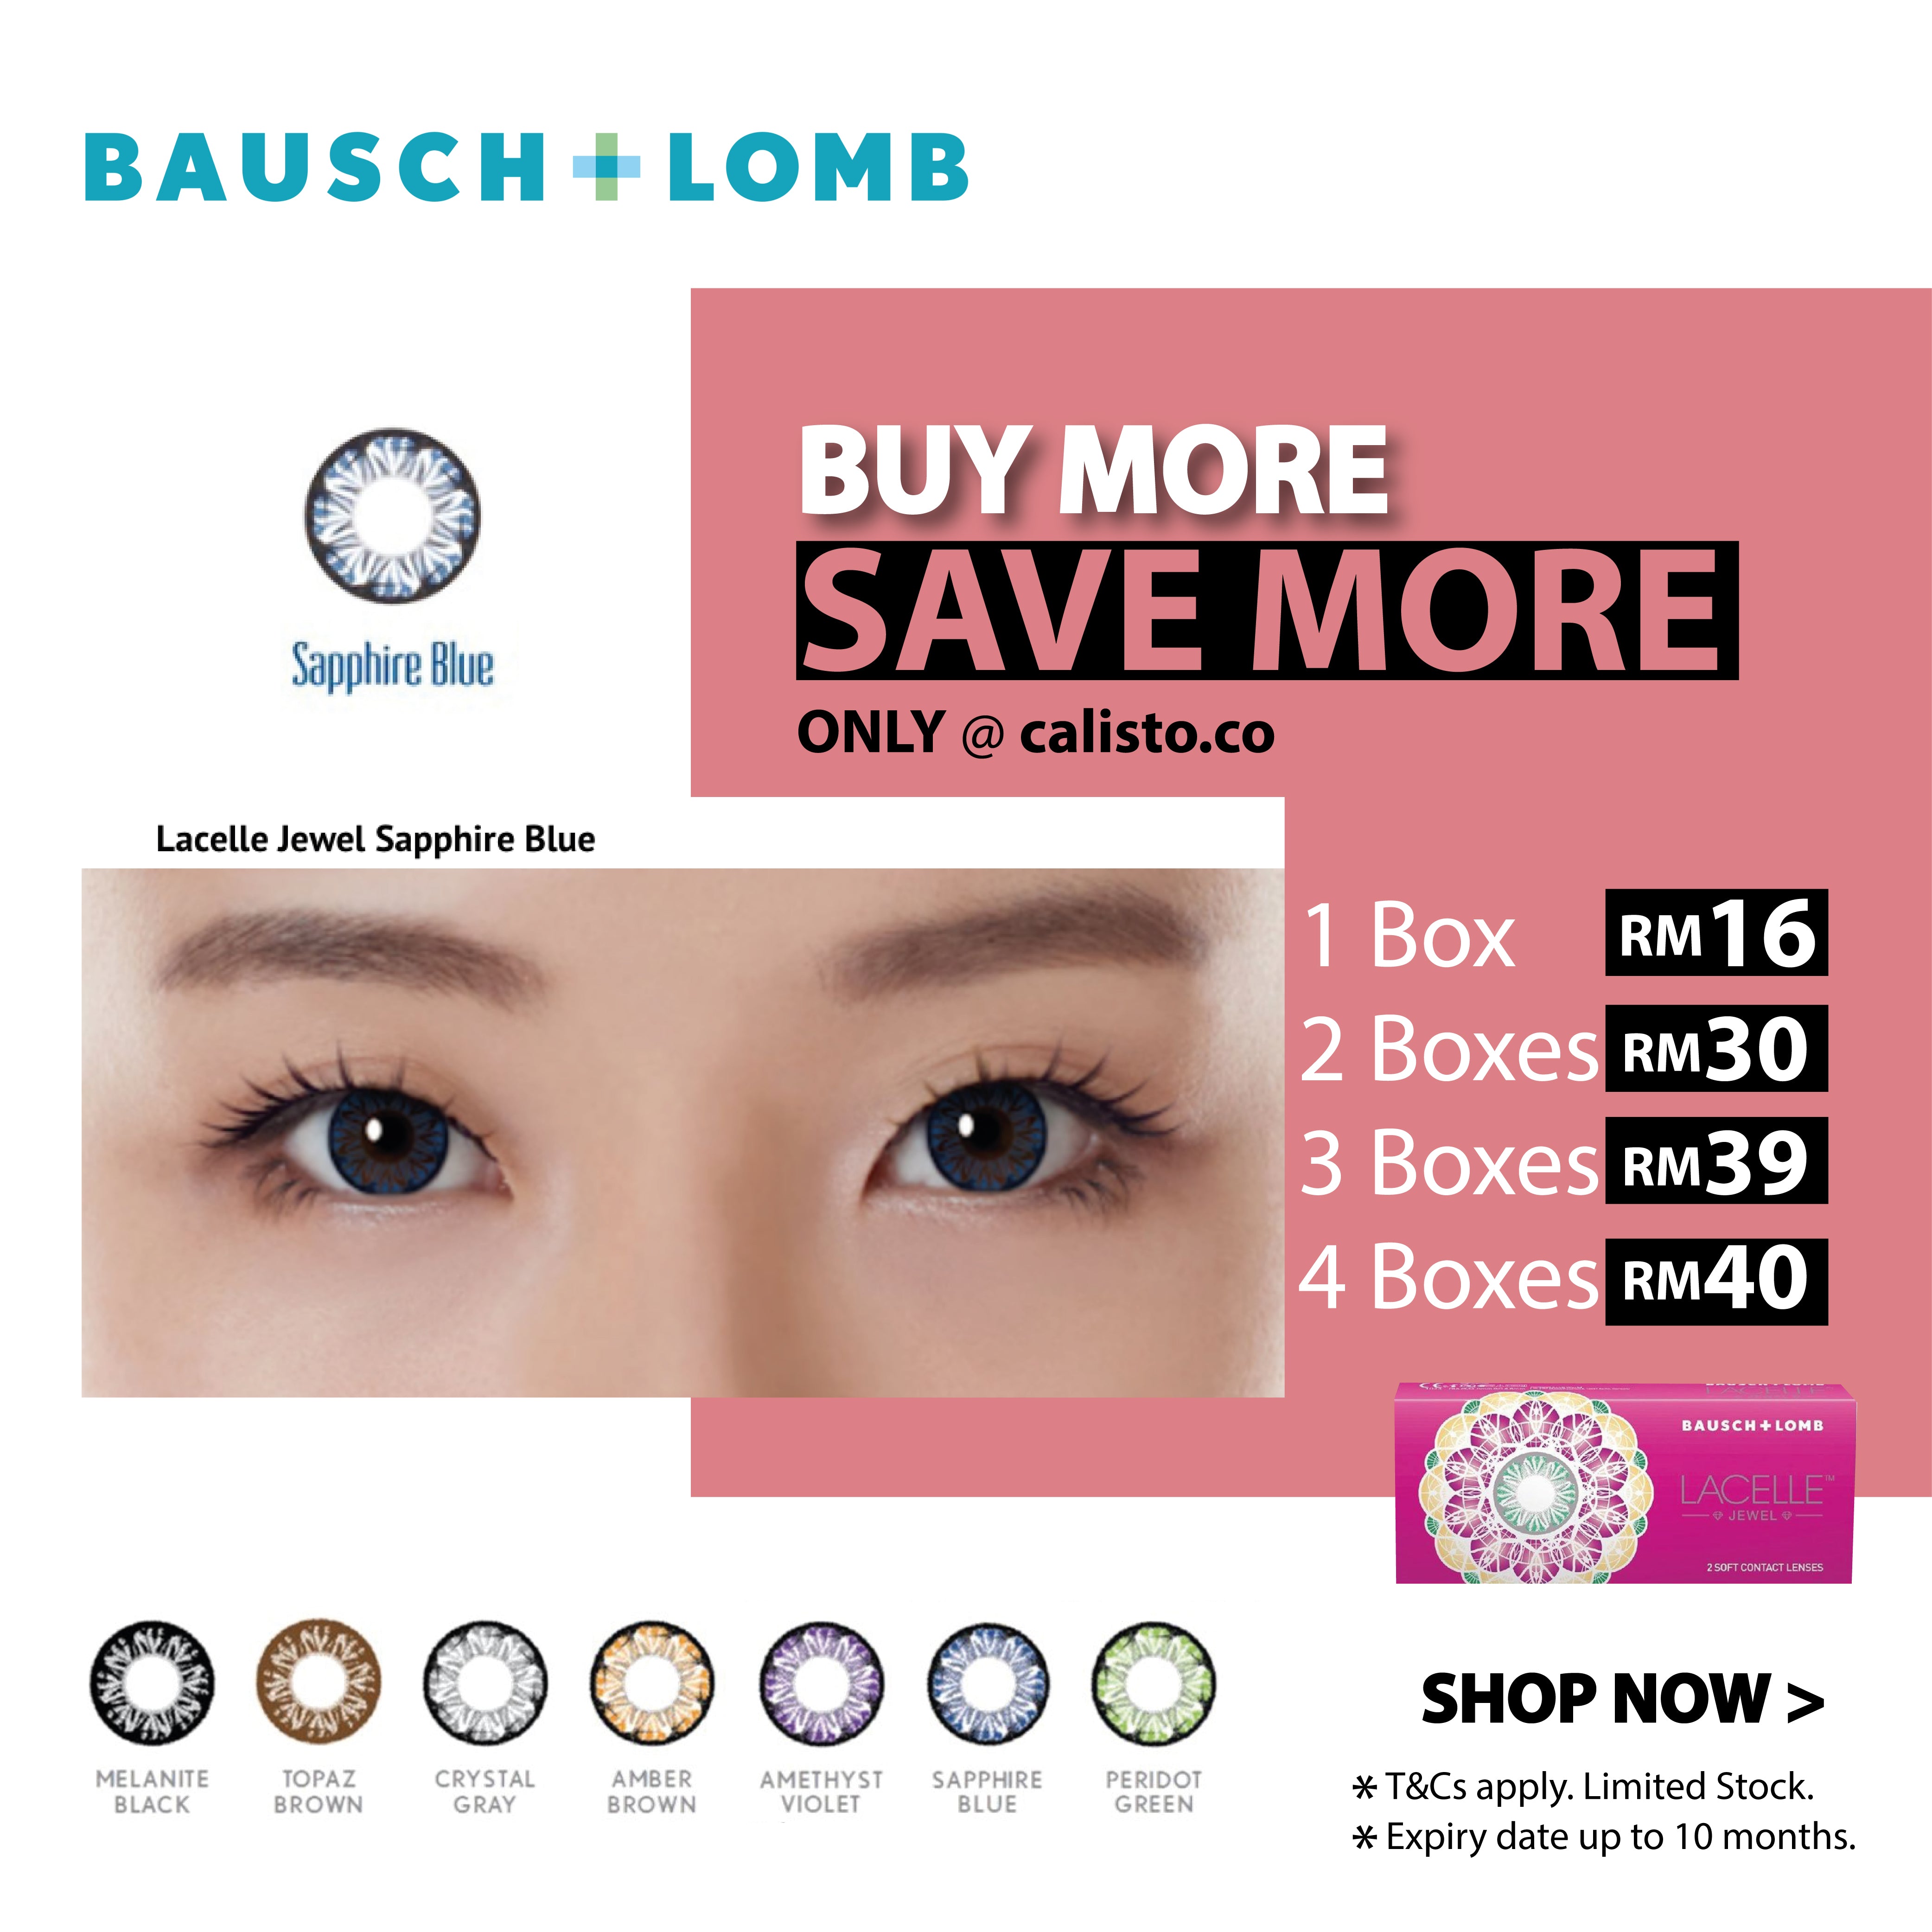 Bausch & Lomb Lacelle Jewel - Sapphire Blue (2 Pack)